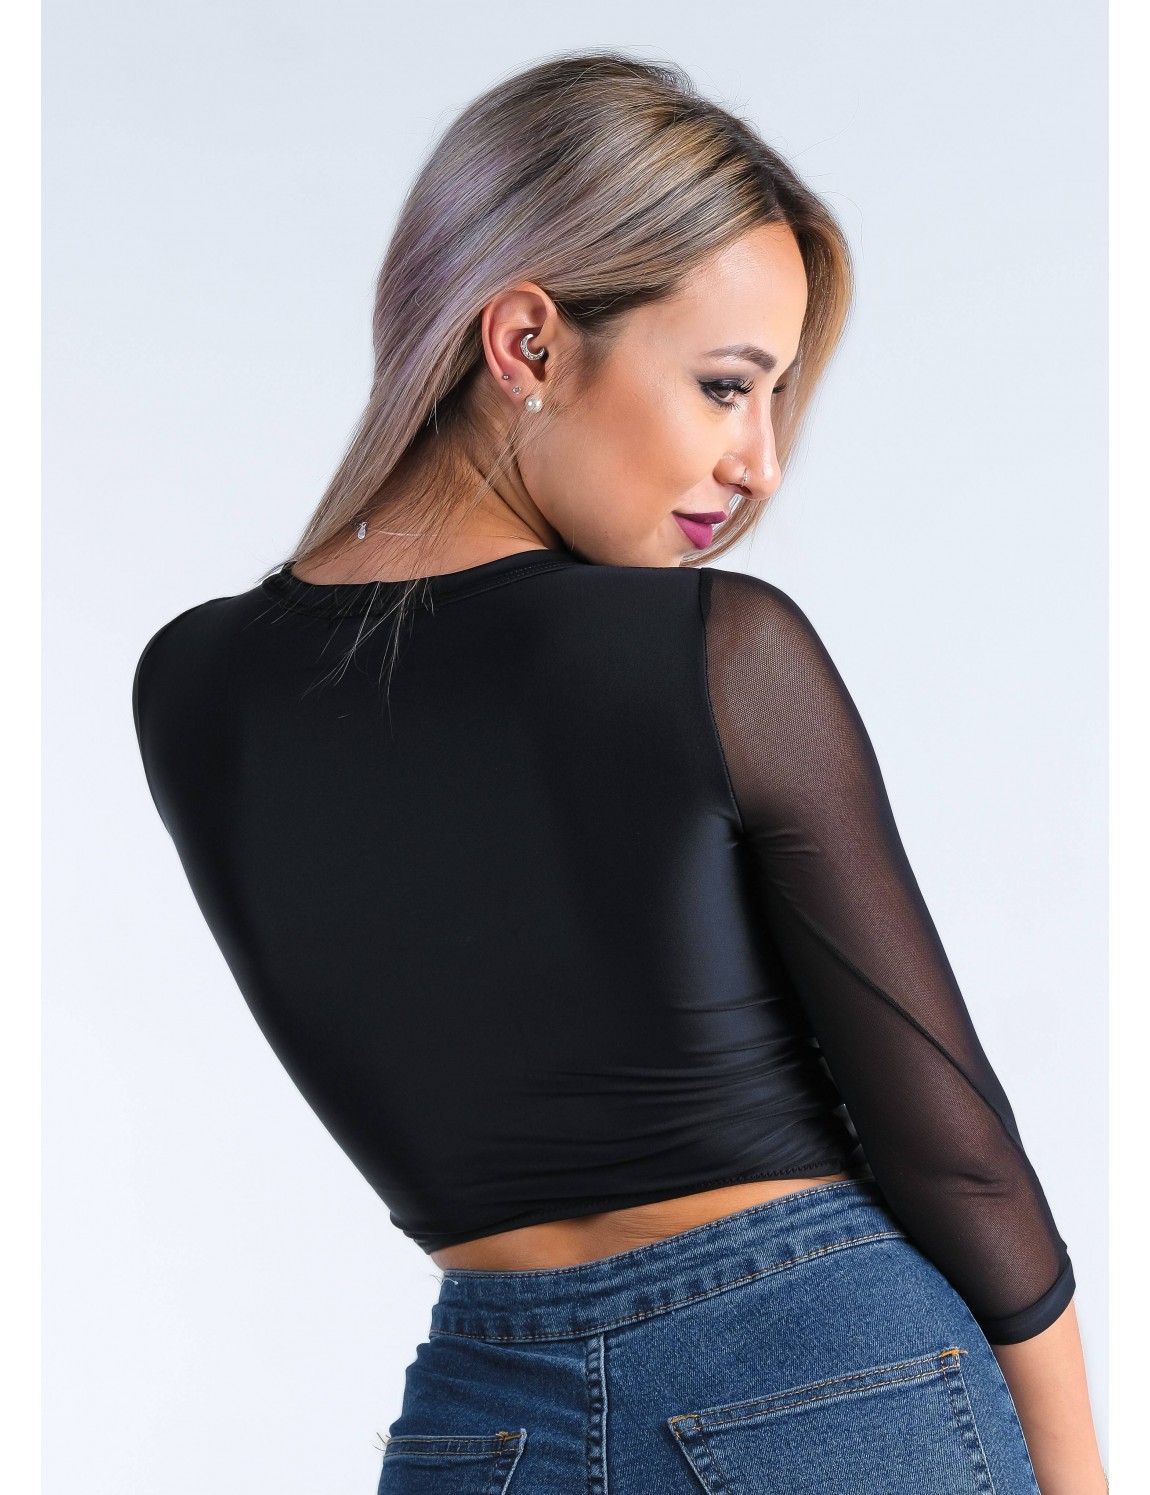 Dance top black lycra with transparencies Stripe for latin dance.